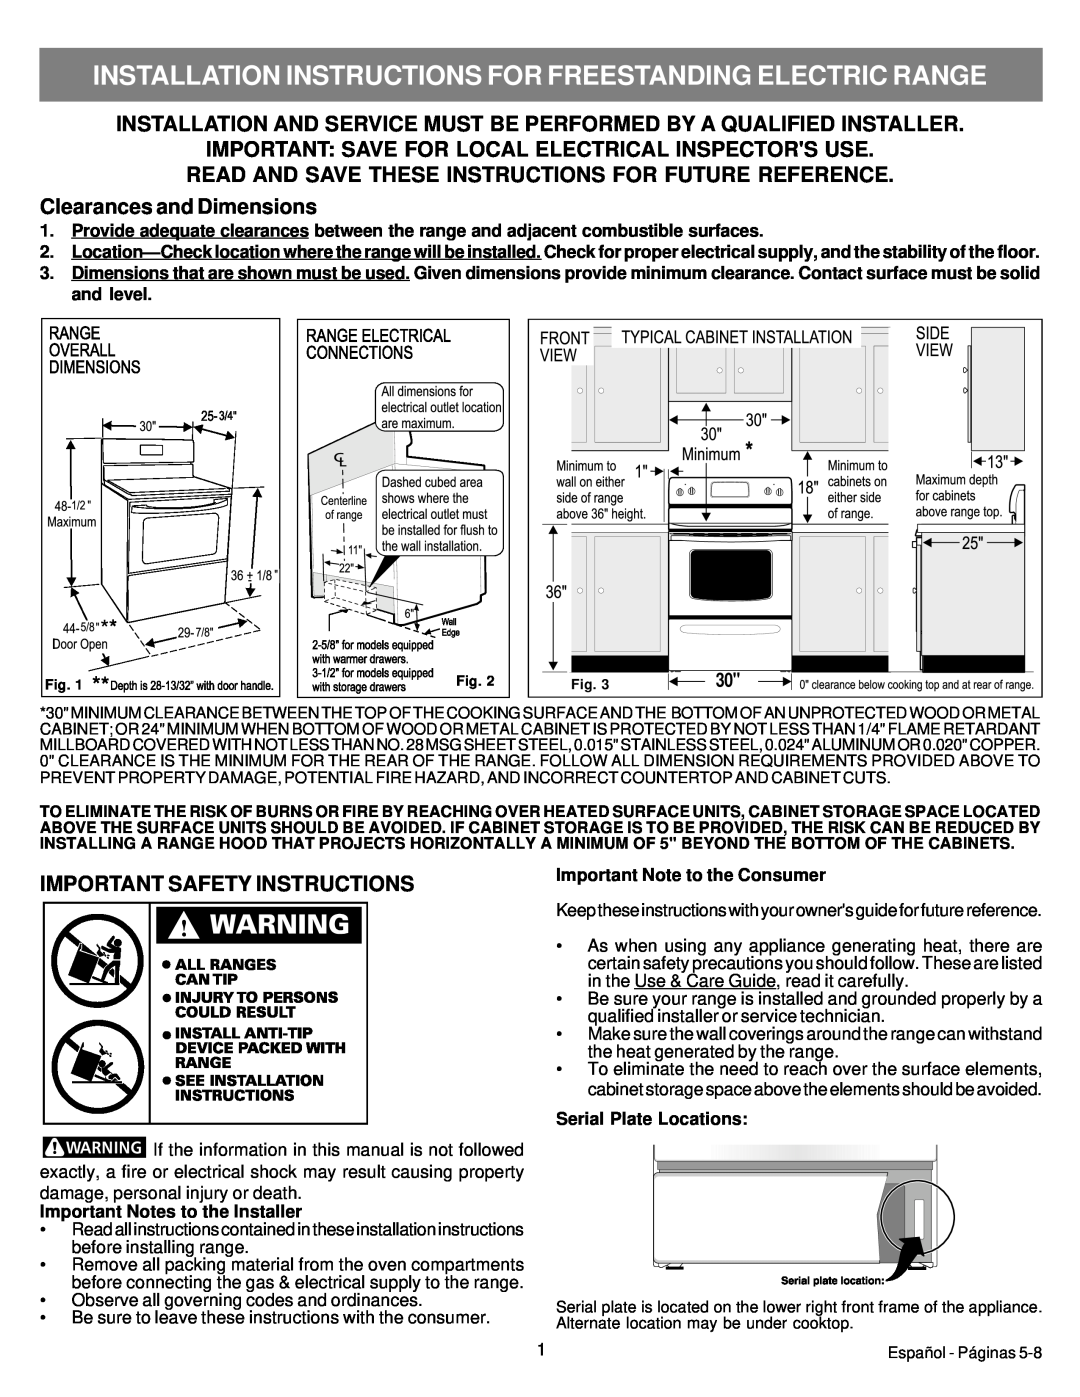 Electrolux 316454909 Installation Instructions For Freestanding Electric Range, Important Notes to the Installer 